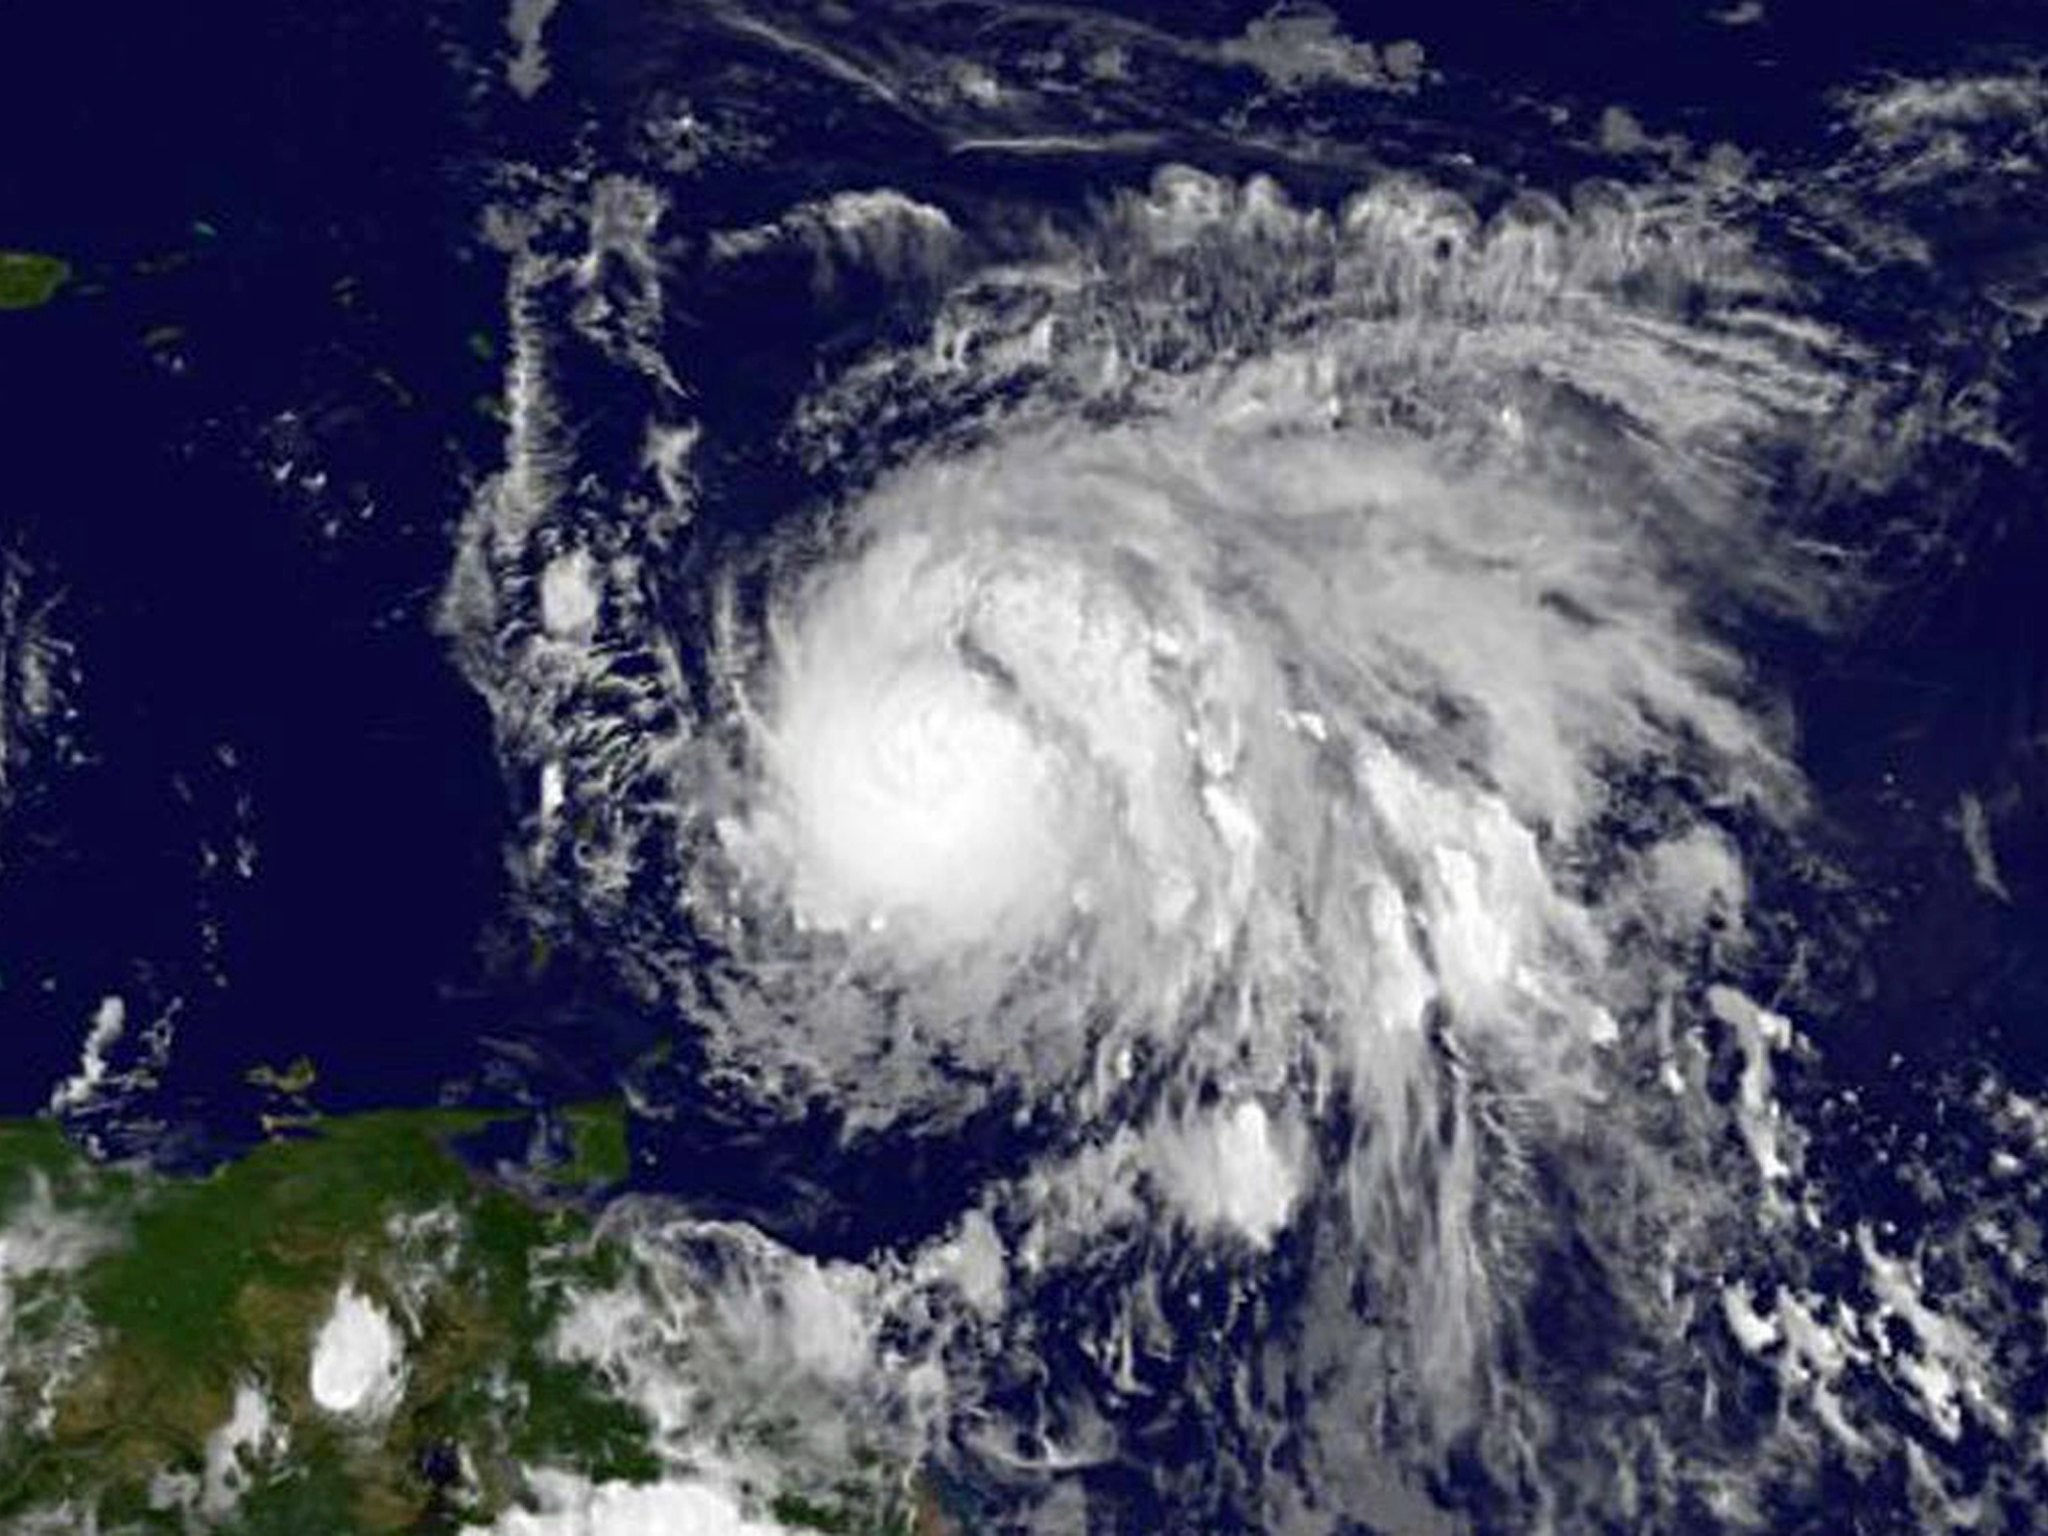 The storm is set to hit several Caribbean islands in the next few days